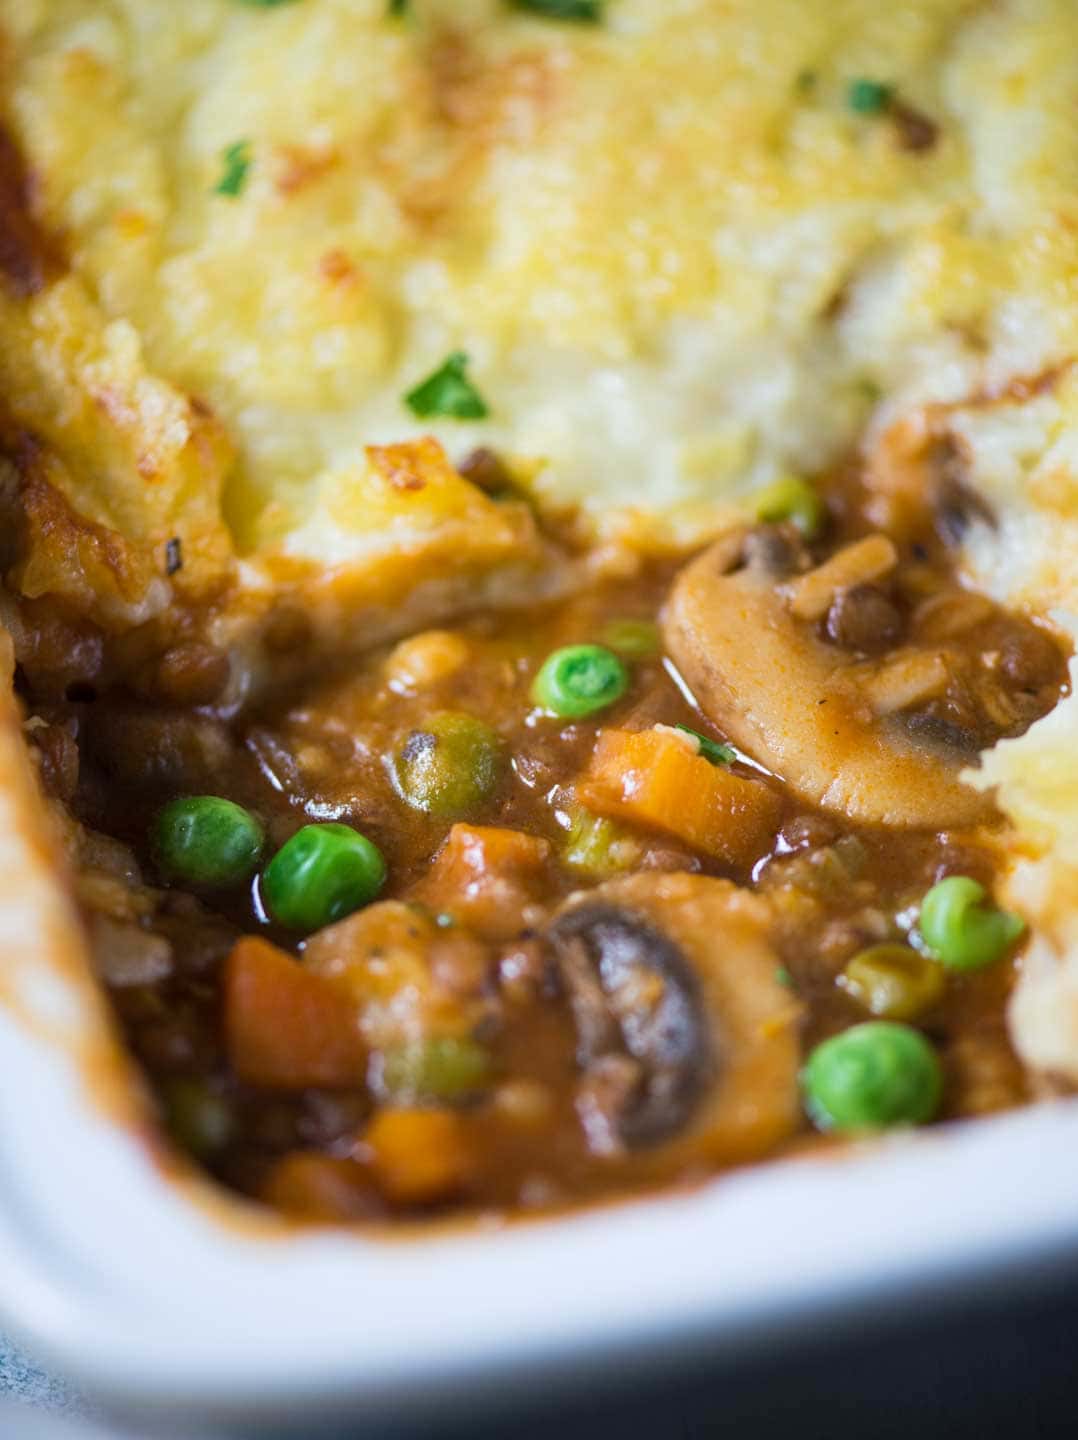 Warm and cosy Vegetarian Shepherd's Pie has a meaty texture from Lentils and vegetables, a flavourful wine-based gravy and then topped with a creamy layer of mashed potato.